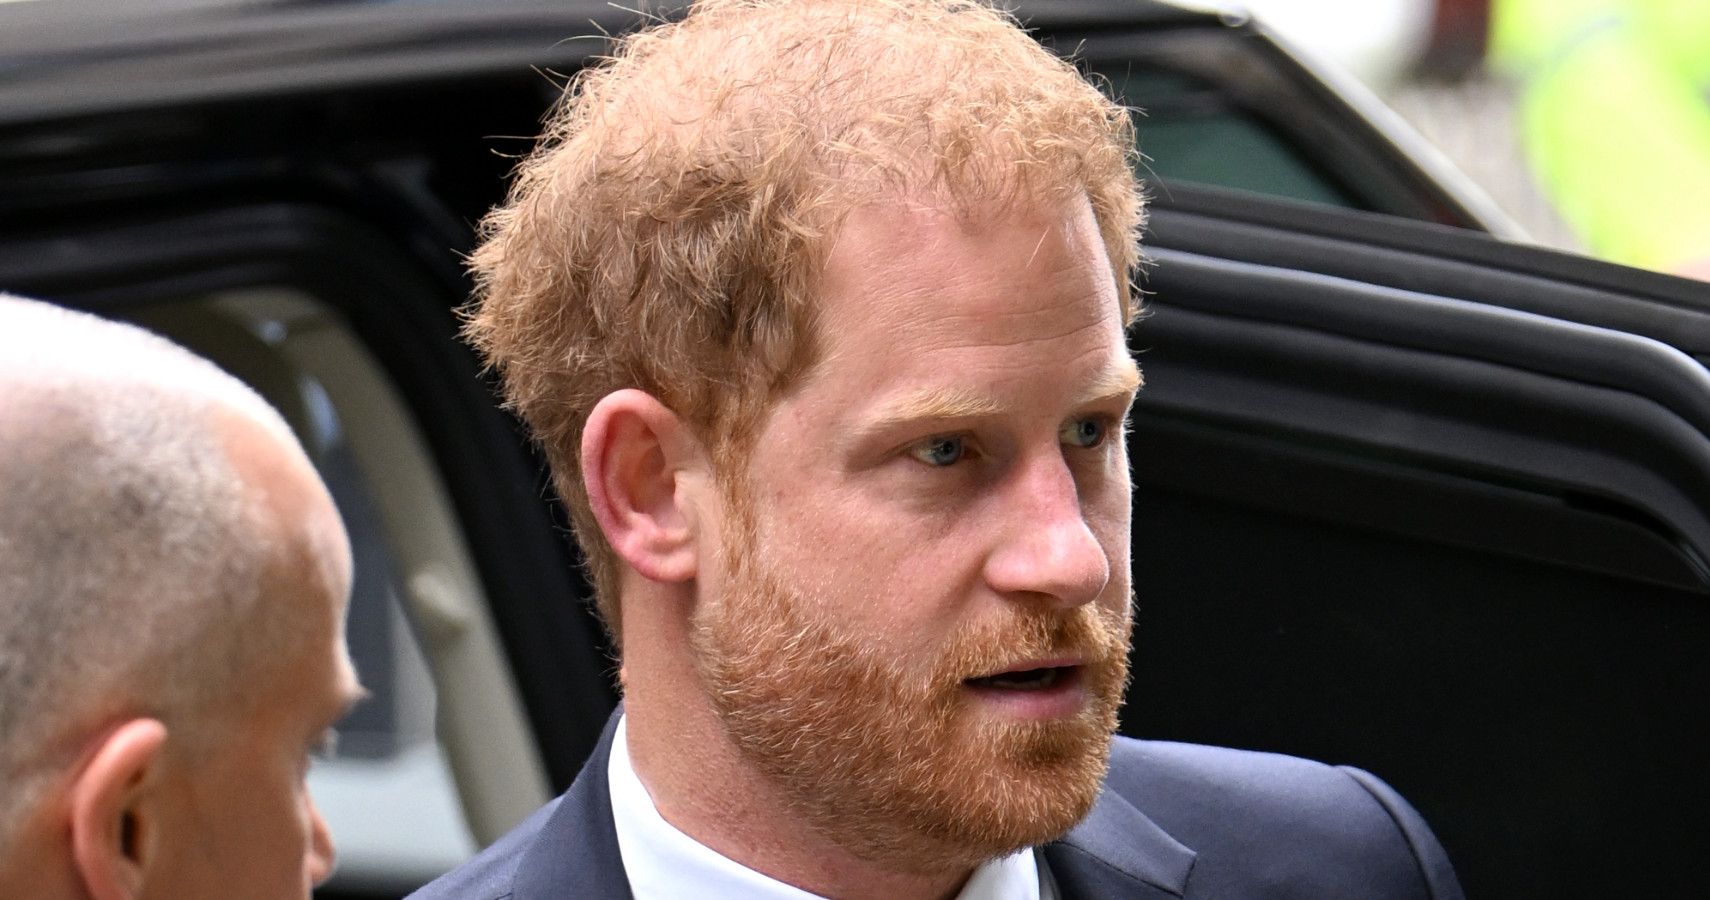 Prince Harry at court in the UK 